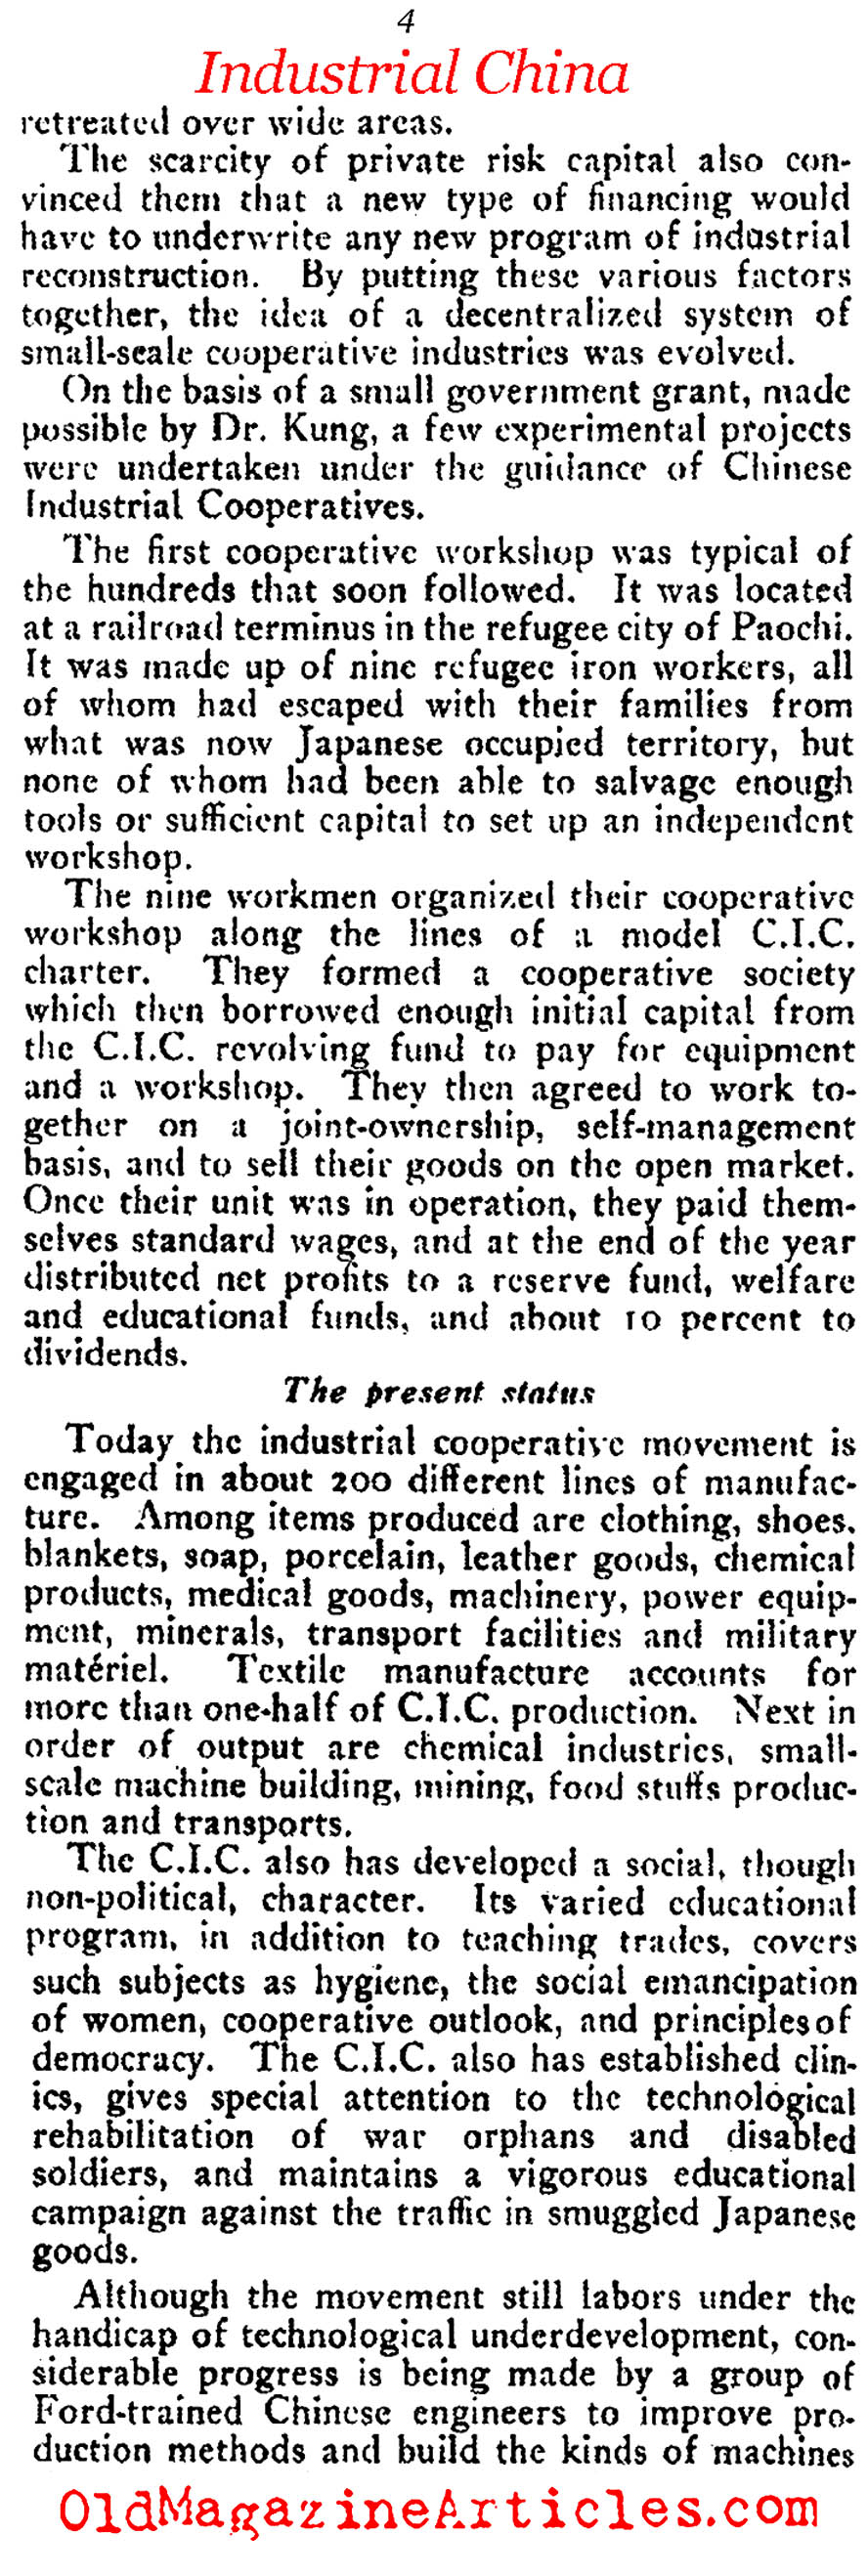 China's Industrial Cooperatives (The Commonweal, 1941)